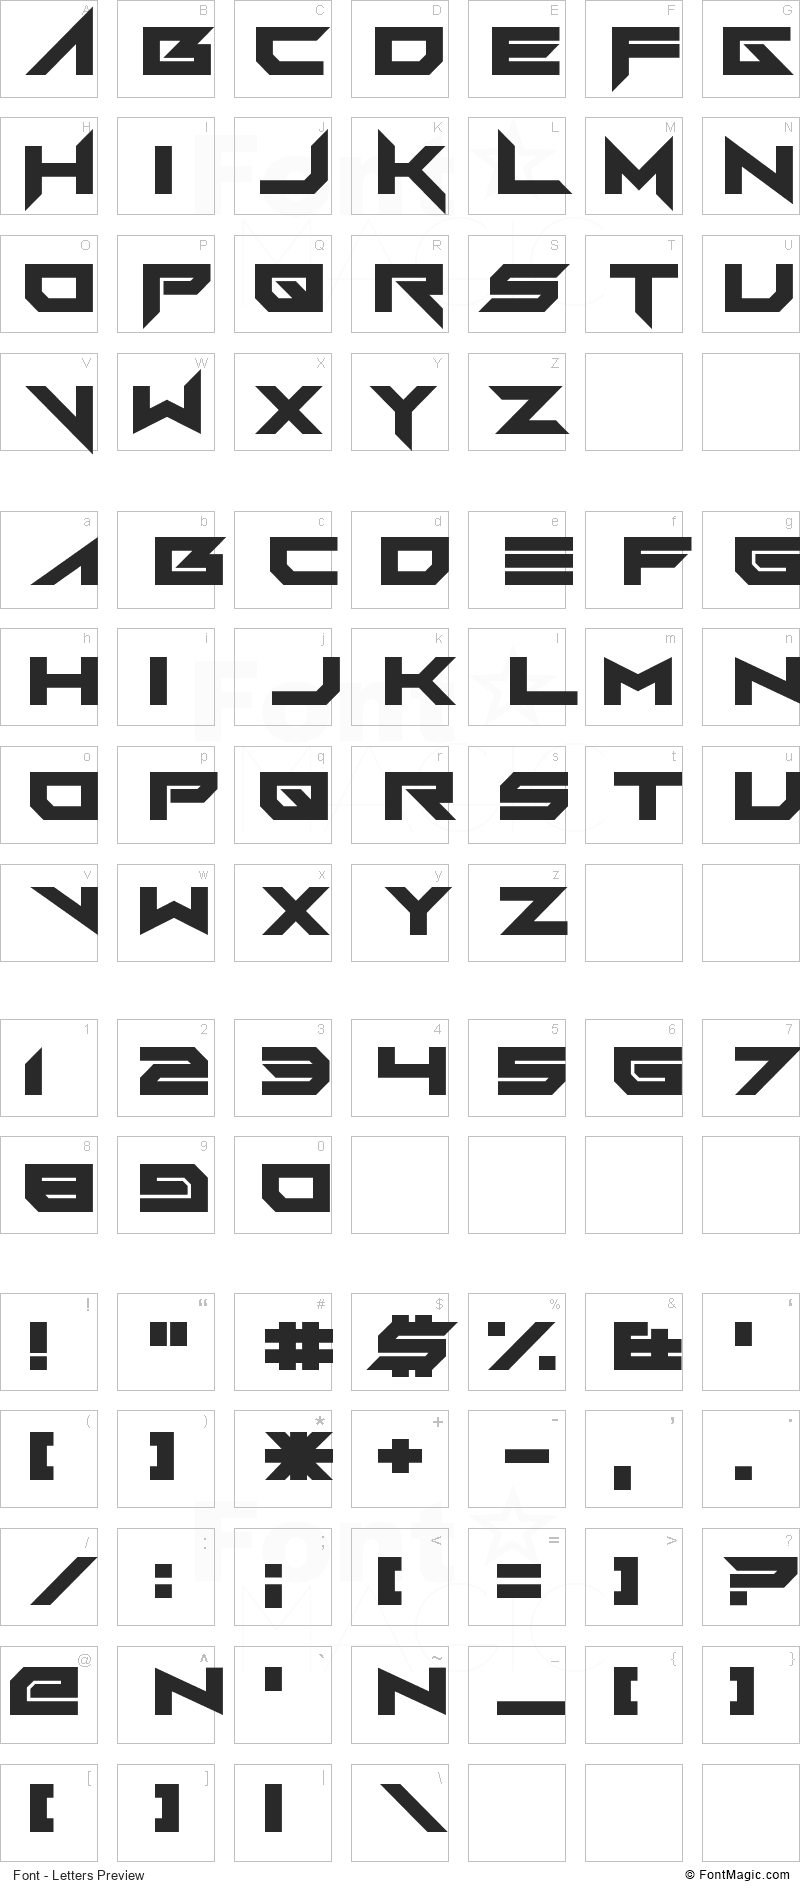 FoughtKnight Victory Font - All Latters Preview Chart